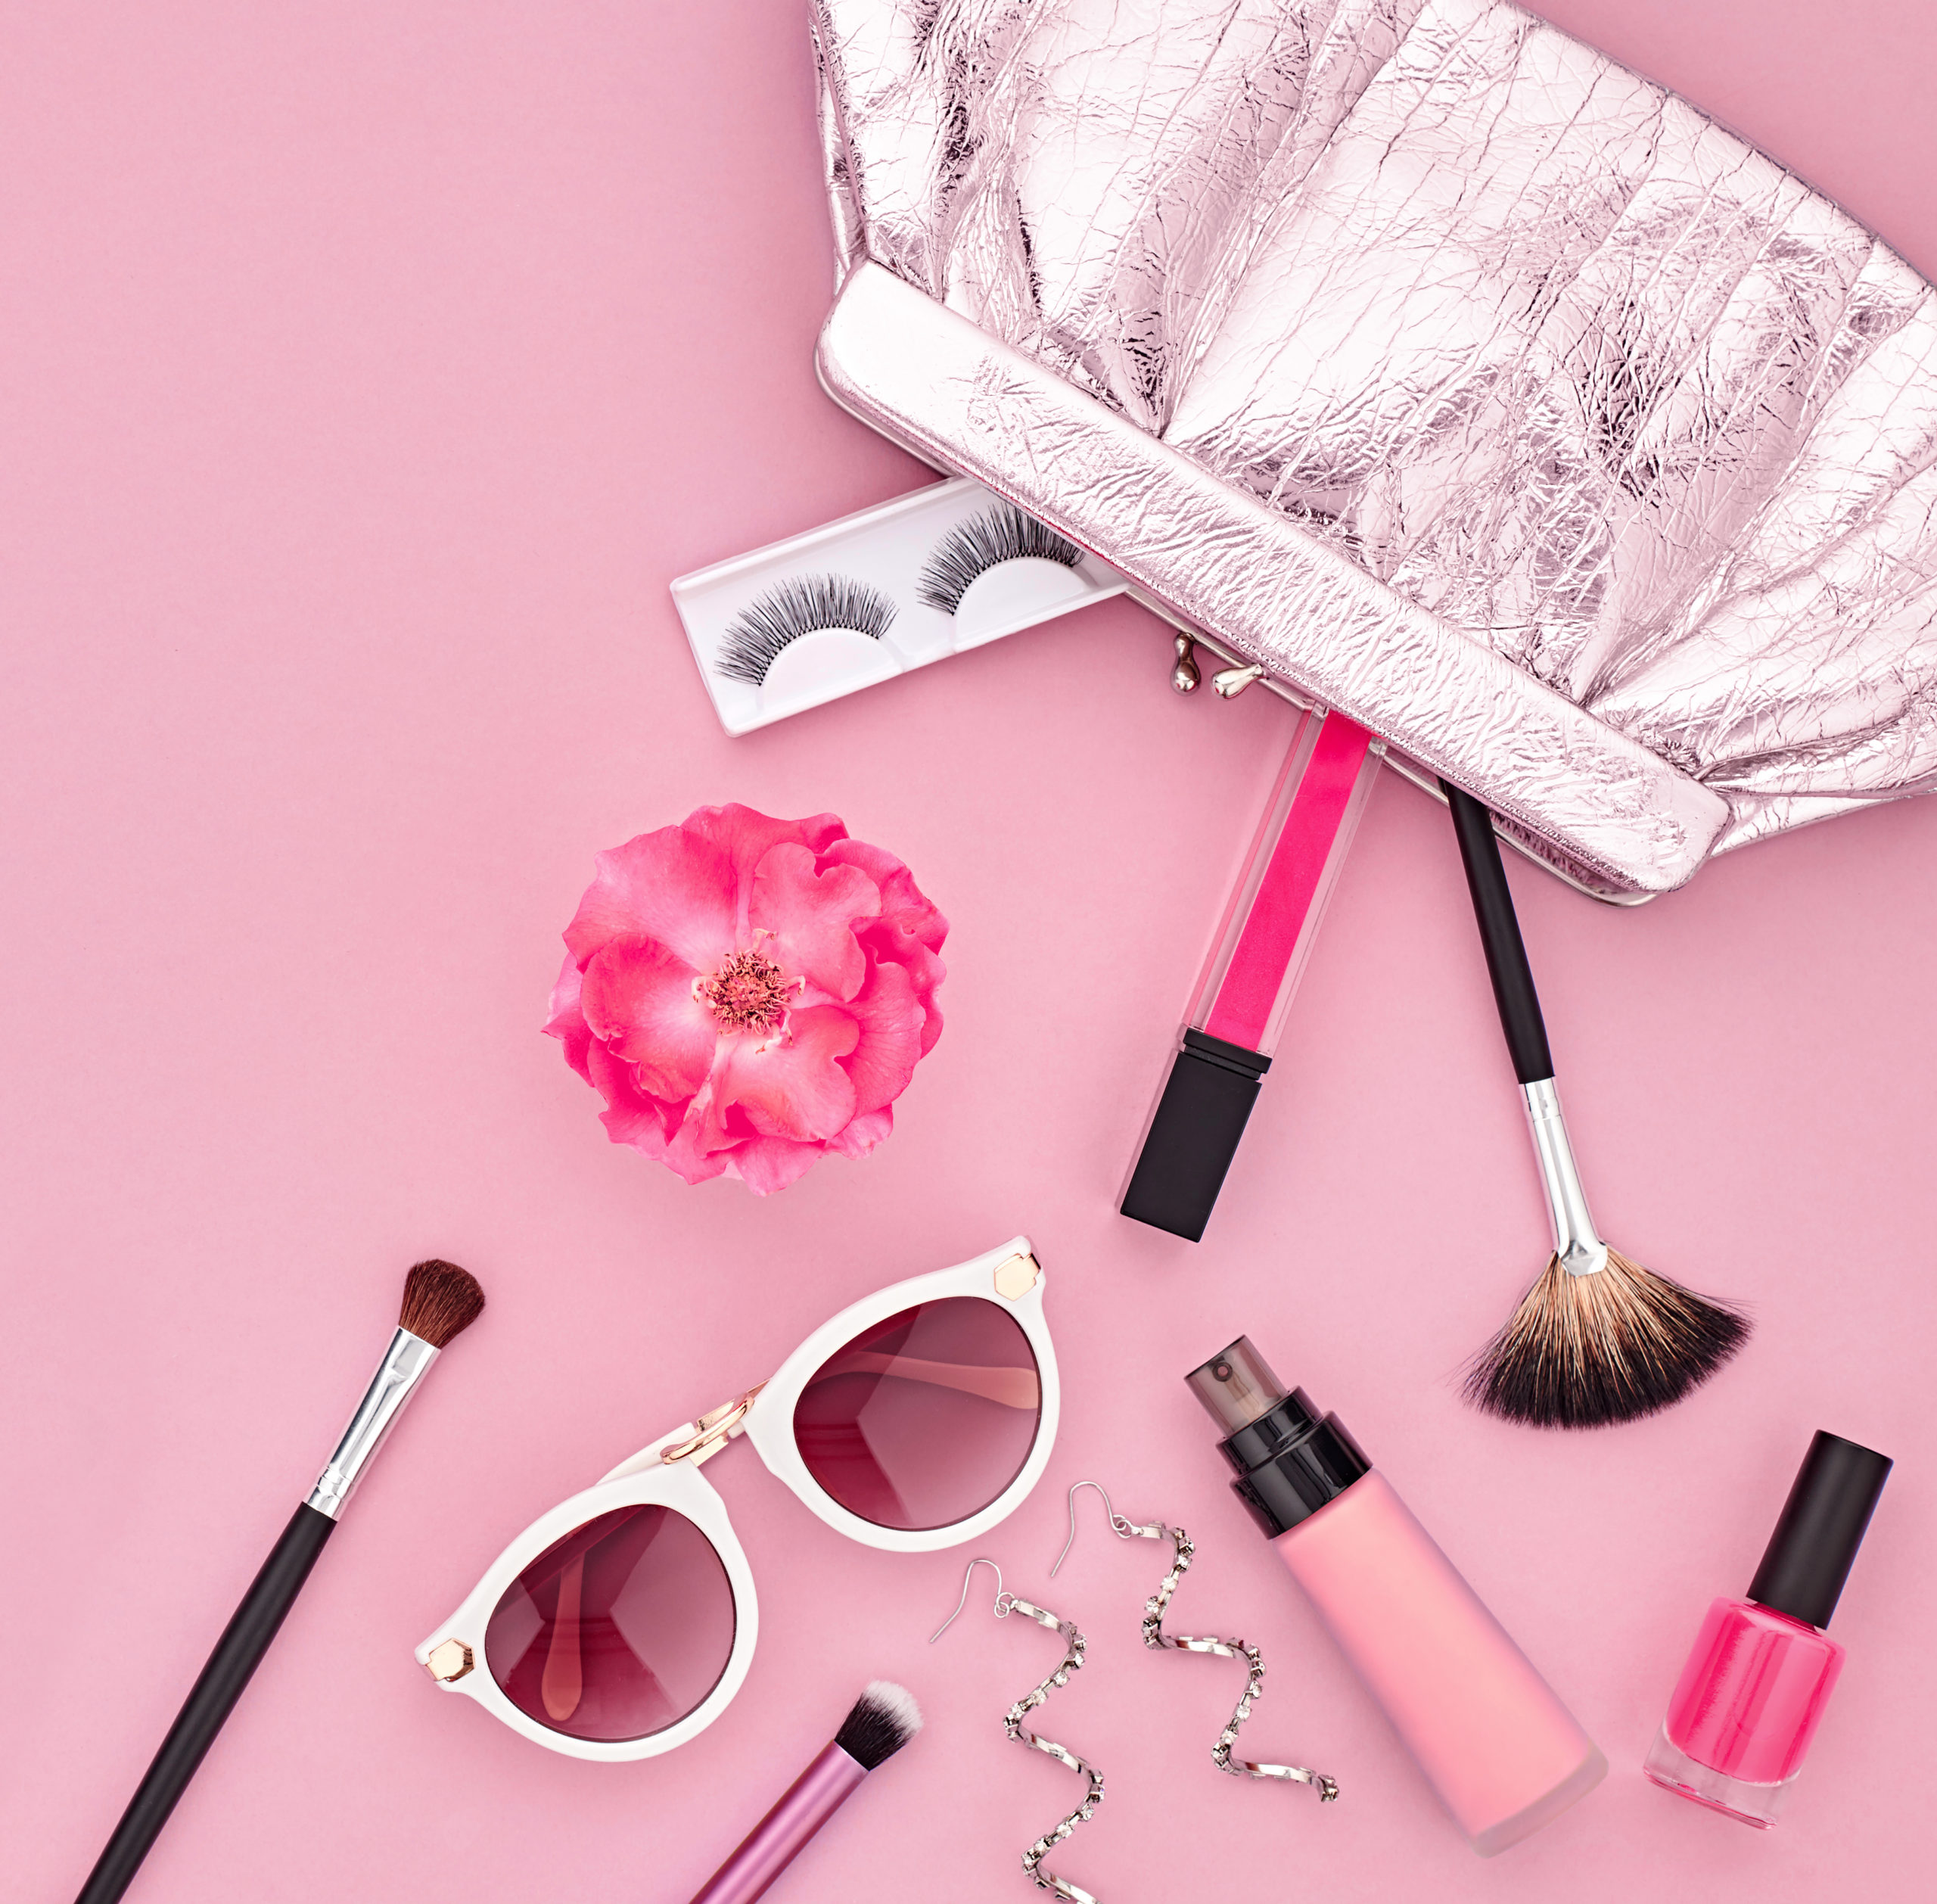 Fashion Makeup Cosmetic Set. Woman Beauty Accessories Set. Makeup Essentials. Fashion Design. Lipstick Brushes Eyeshadow, fashion Glamor Stylish Clutch. Rose.Minimal Concept.Top view.Cosmetic Overhead